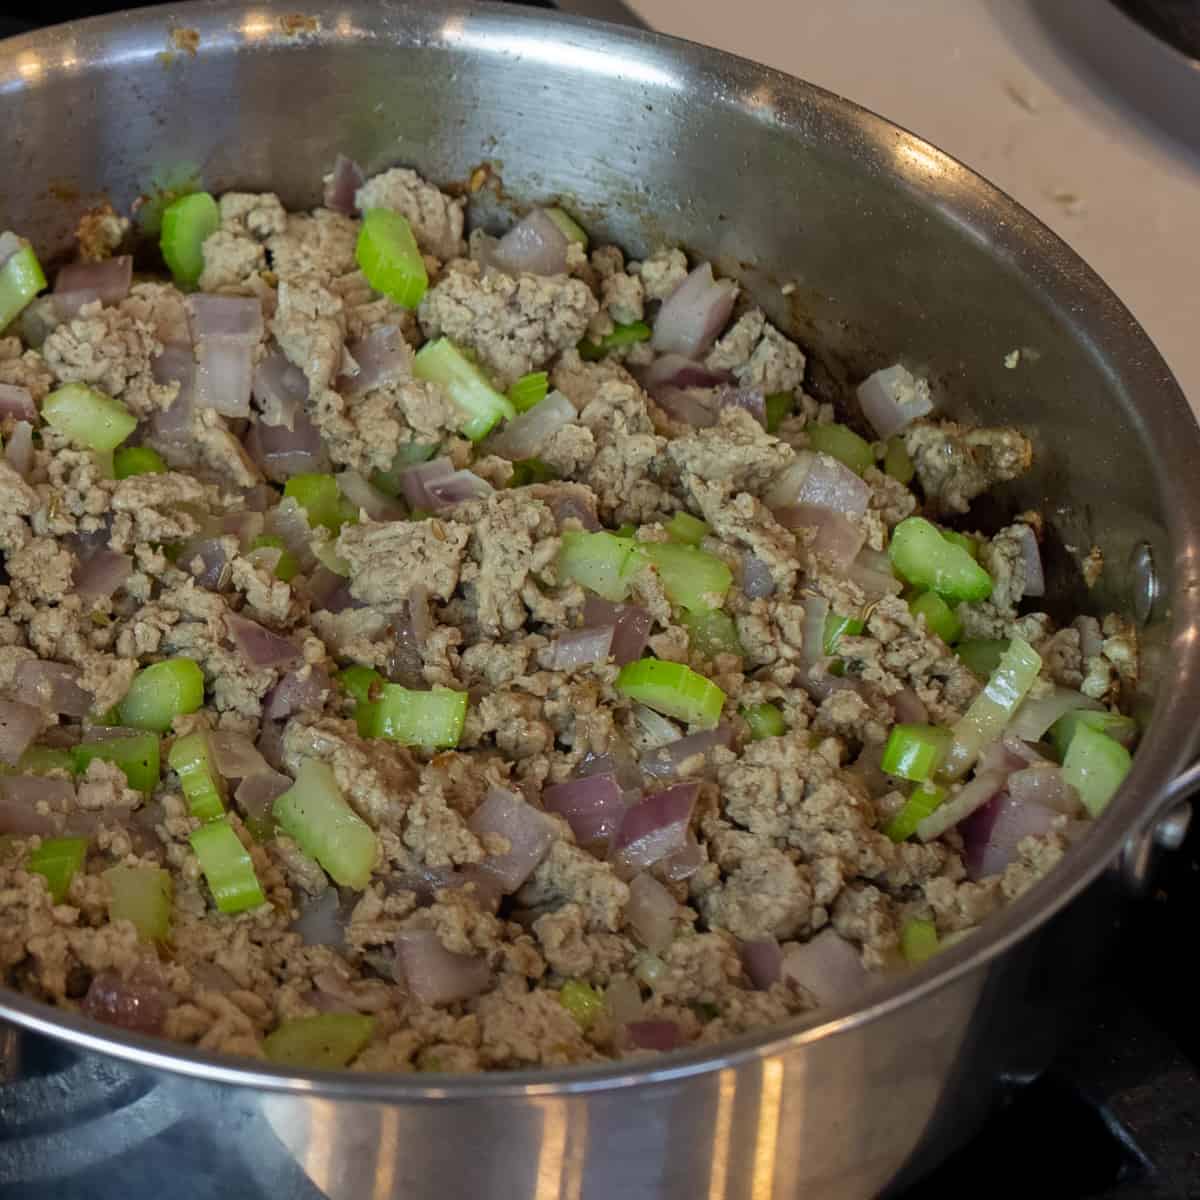 Cooked ground turkey, onions and celery in a frying pan.